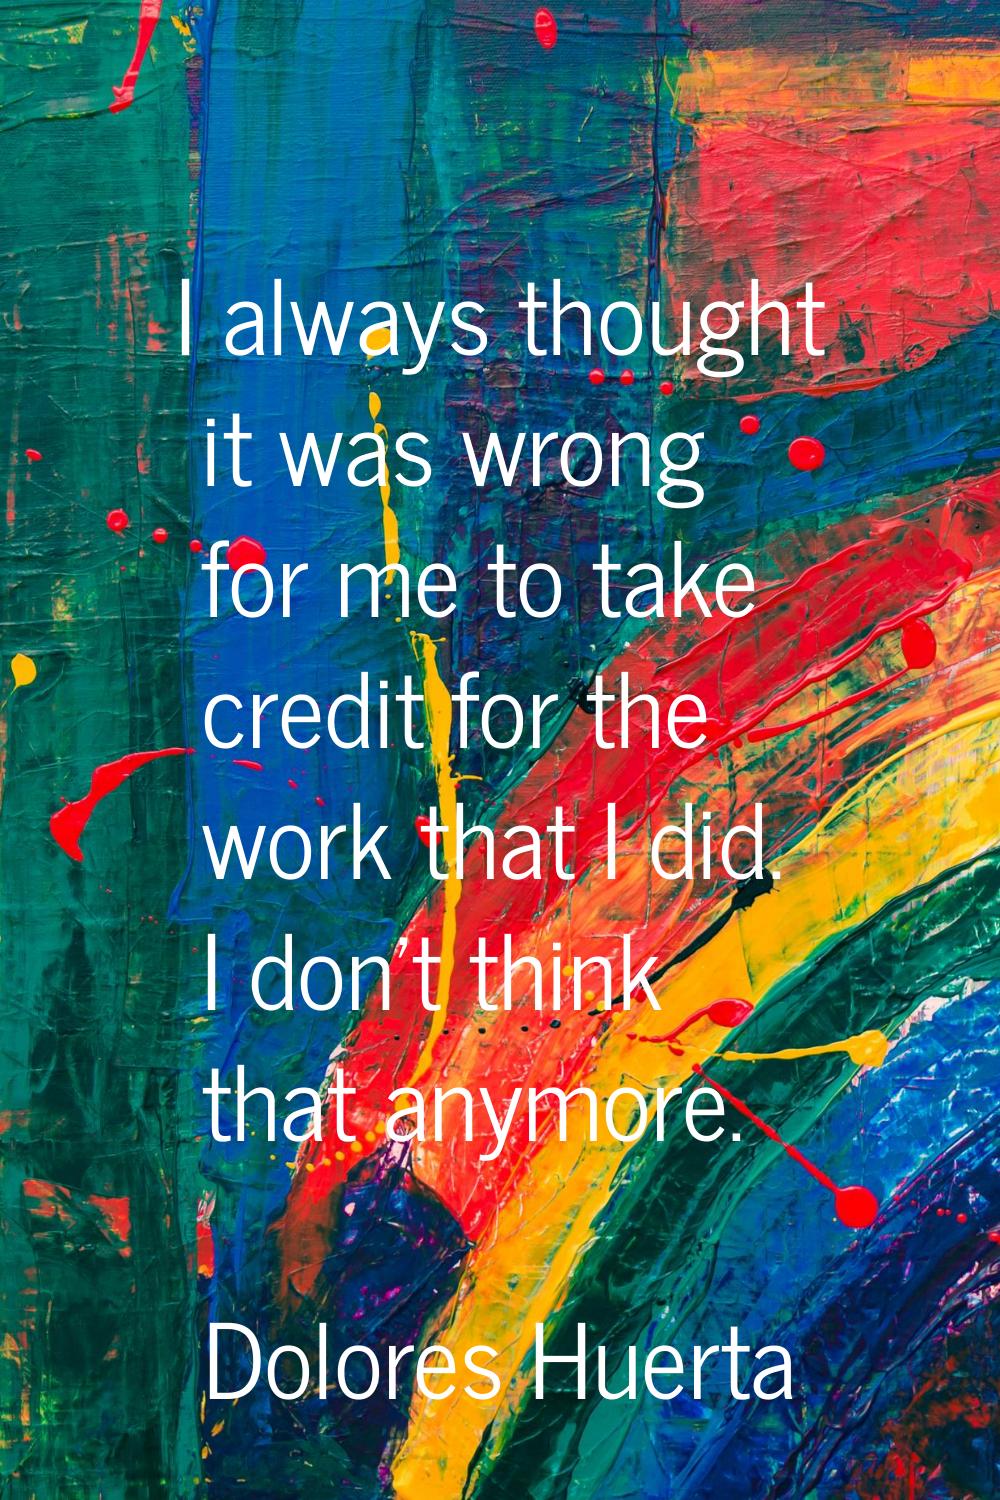 I always thought it was wrong for me to take credit for the work that I did. I don't think that any